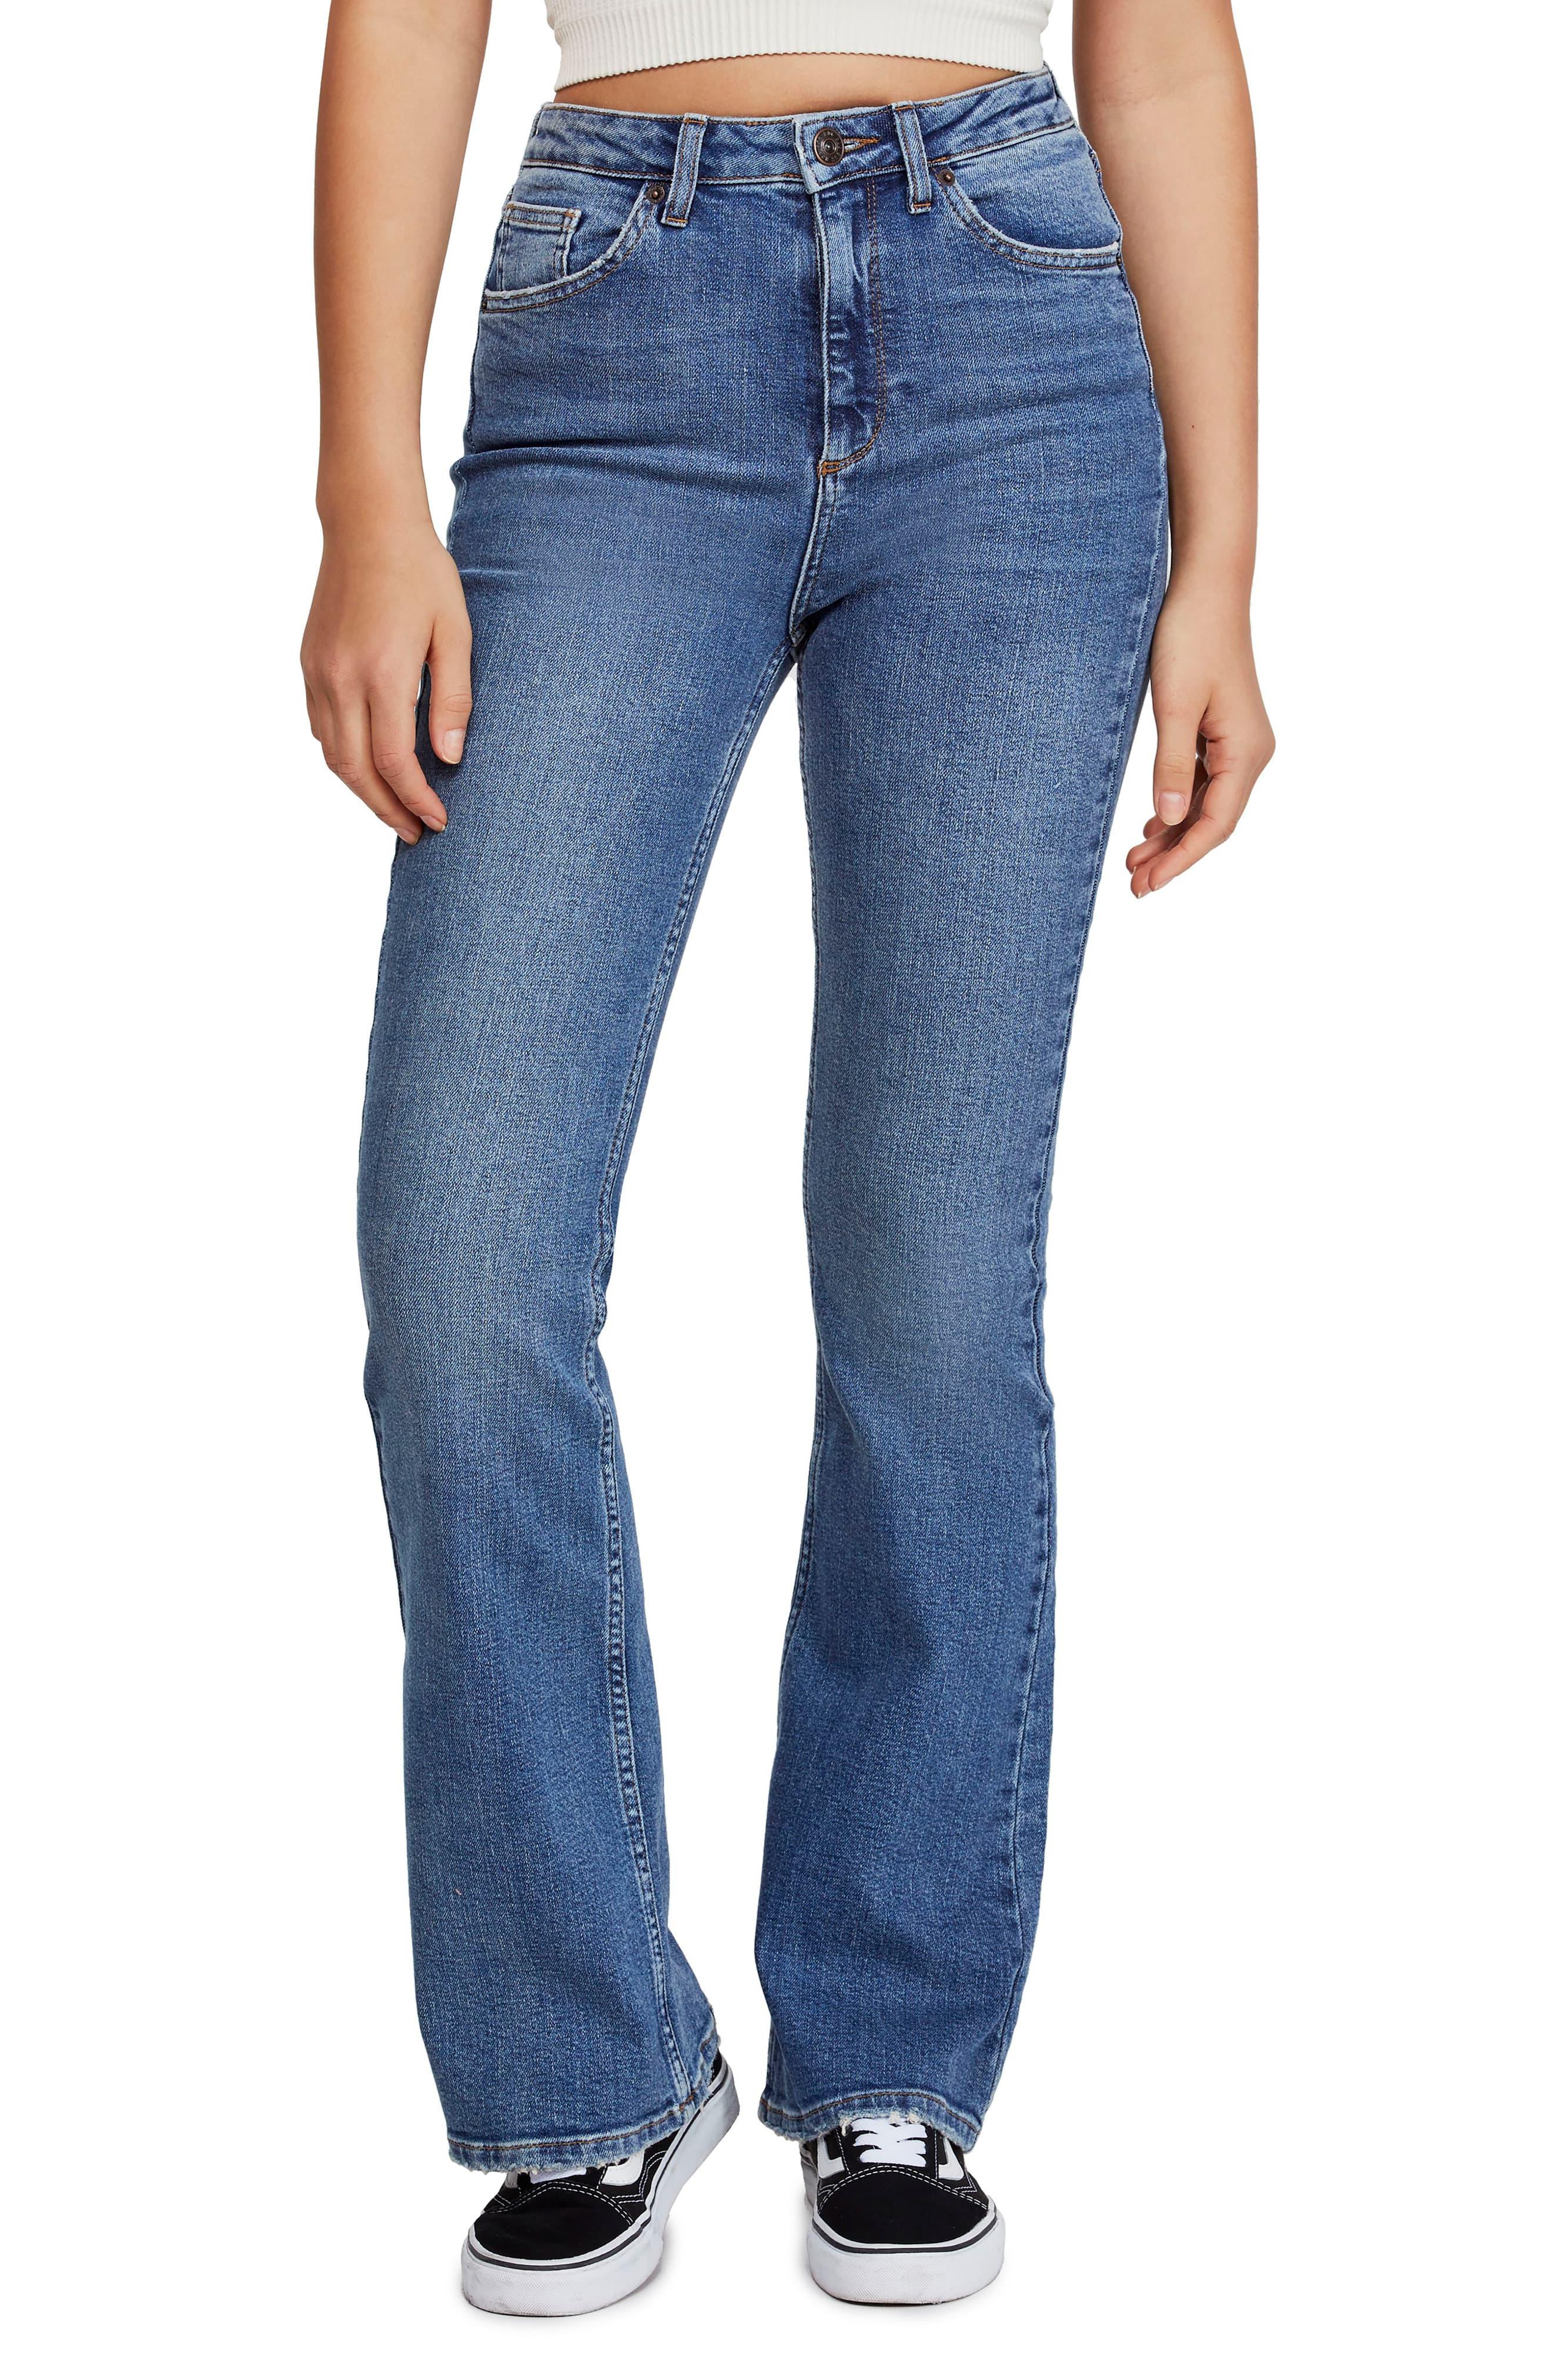 BDG Denim Urban Outfitters Super Flare Jeans in Blue - Lyst